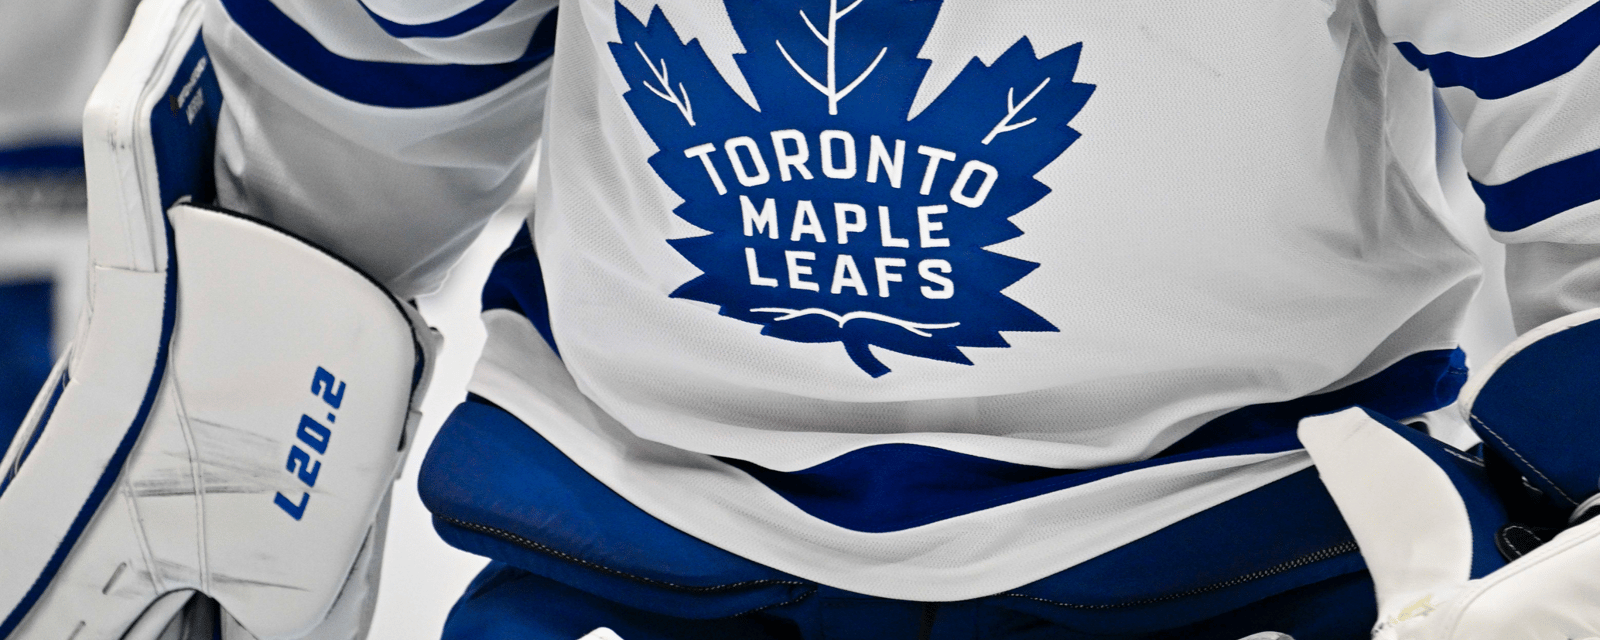 Leafs goalie impresses with eye-popping gear design 